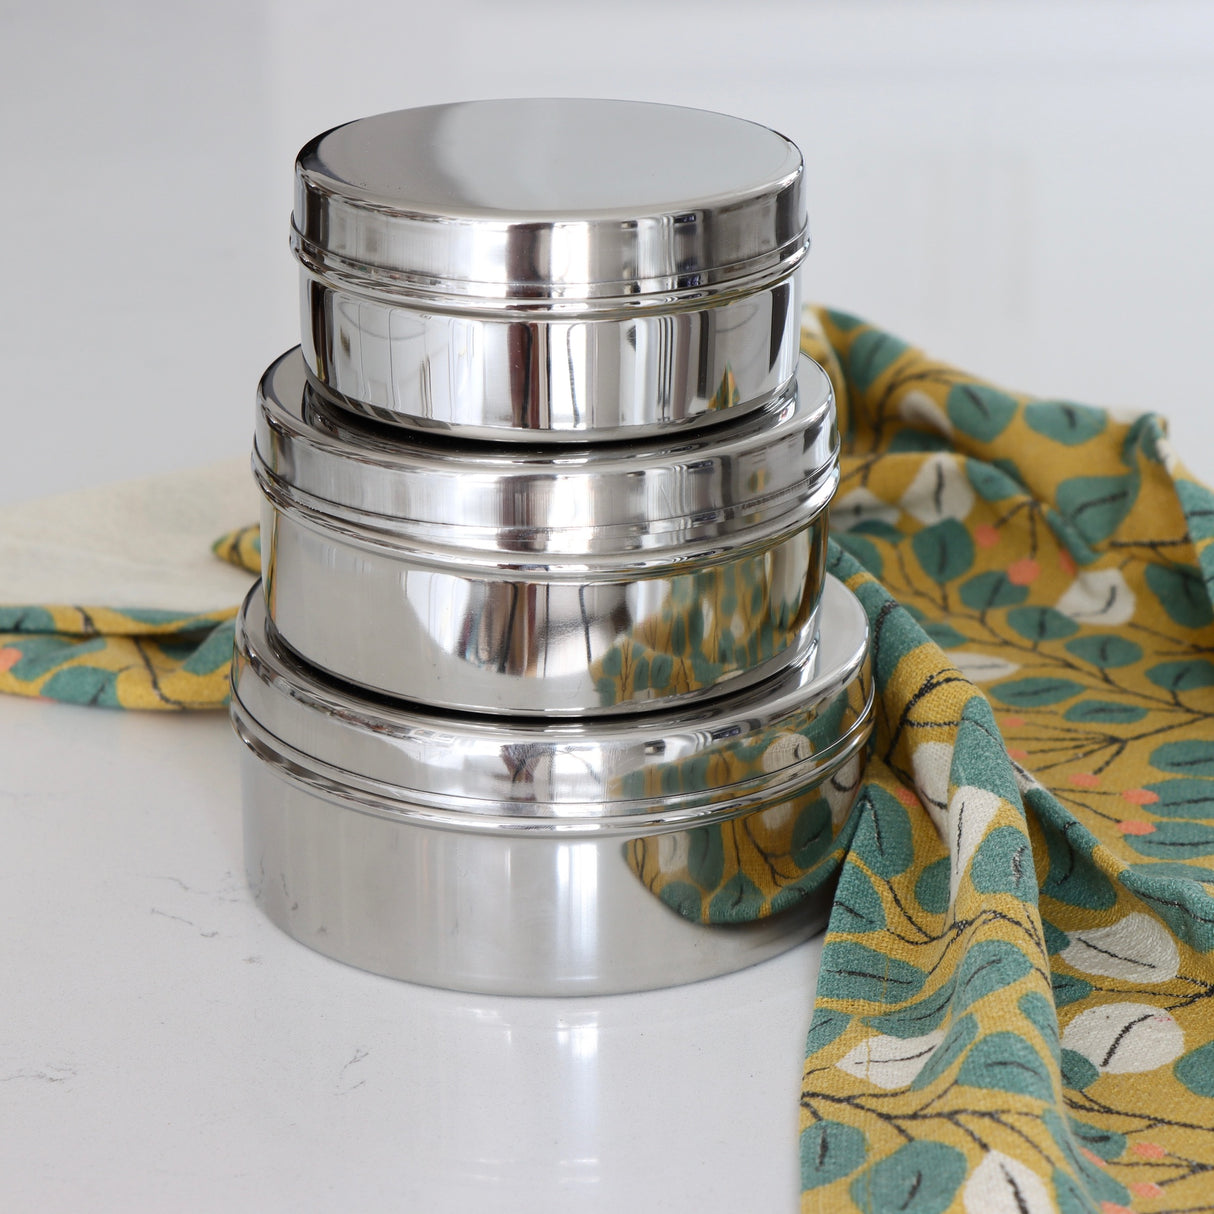 Hatbox Style Stainless Steel Storage Containers - Set of 3 - Holistic Habitat 